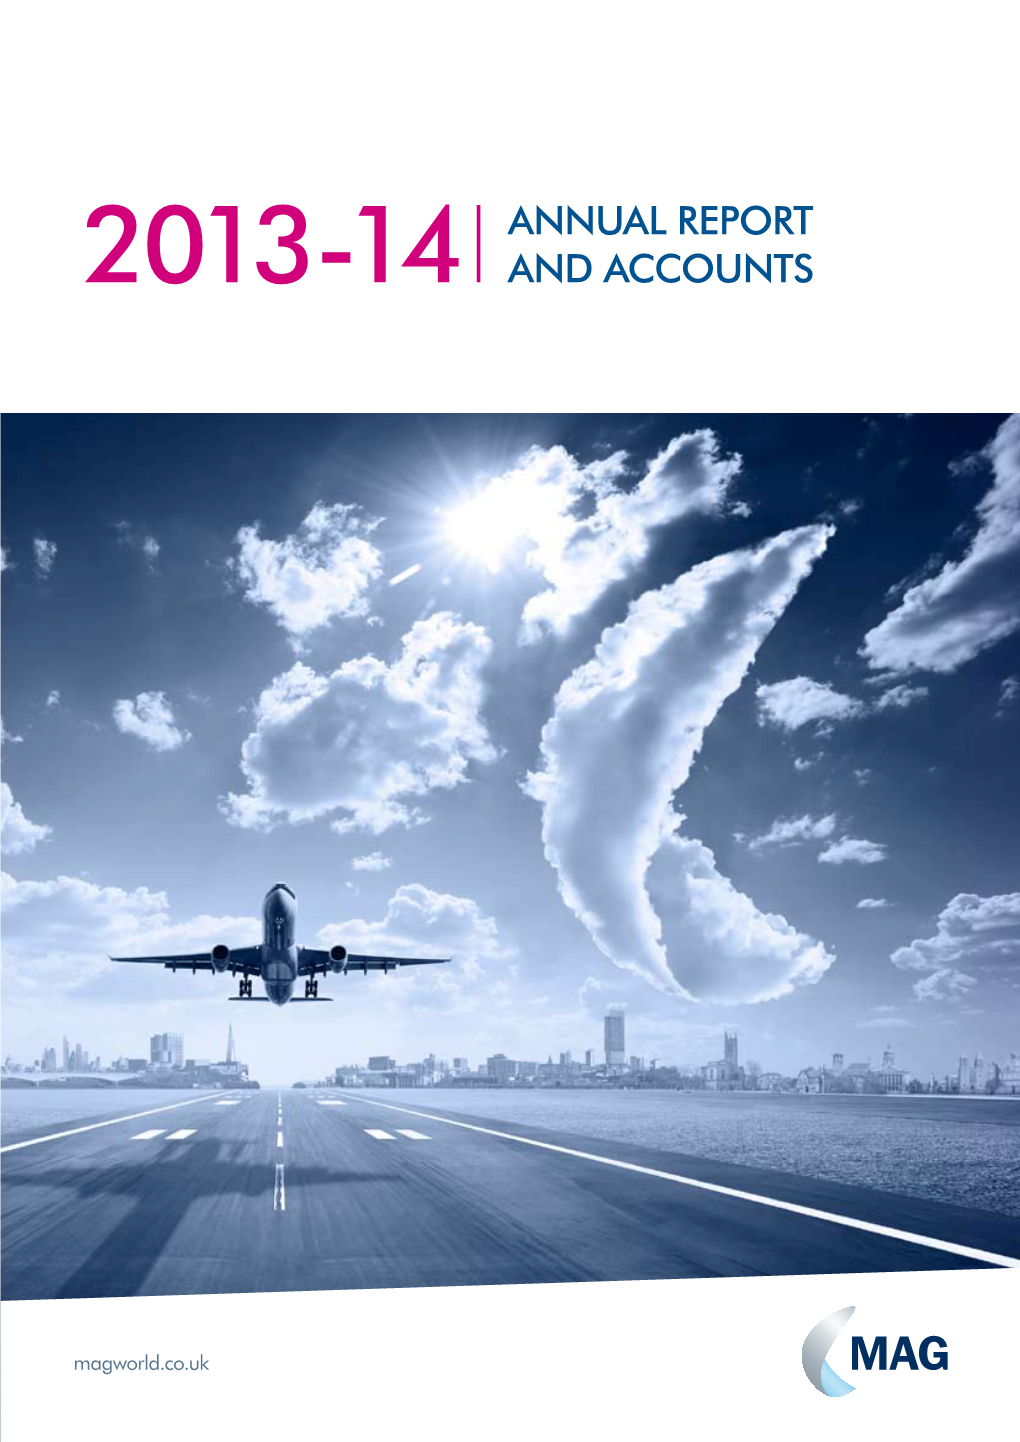 2013-14 Annual Report and Accounts